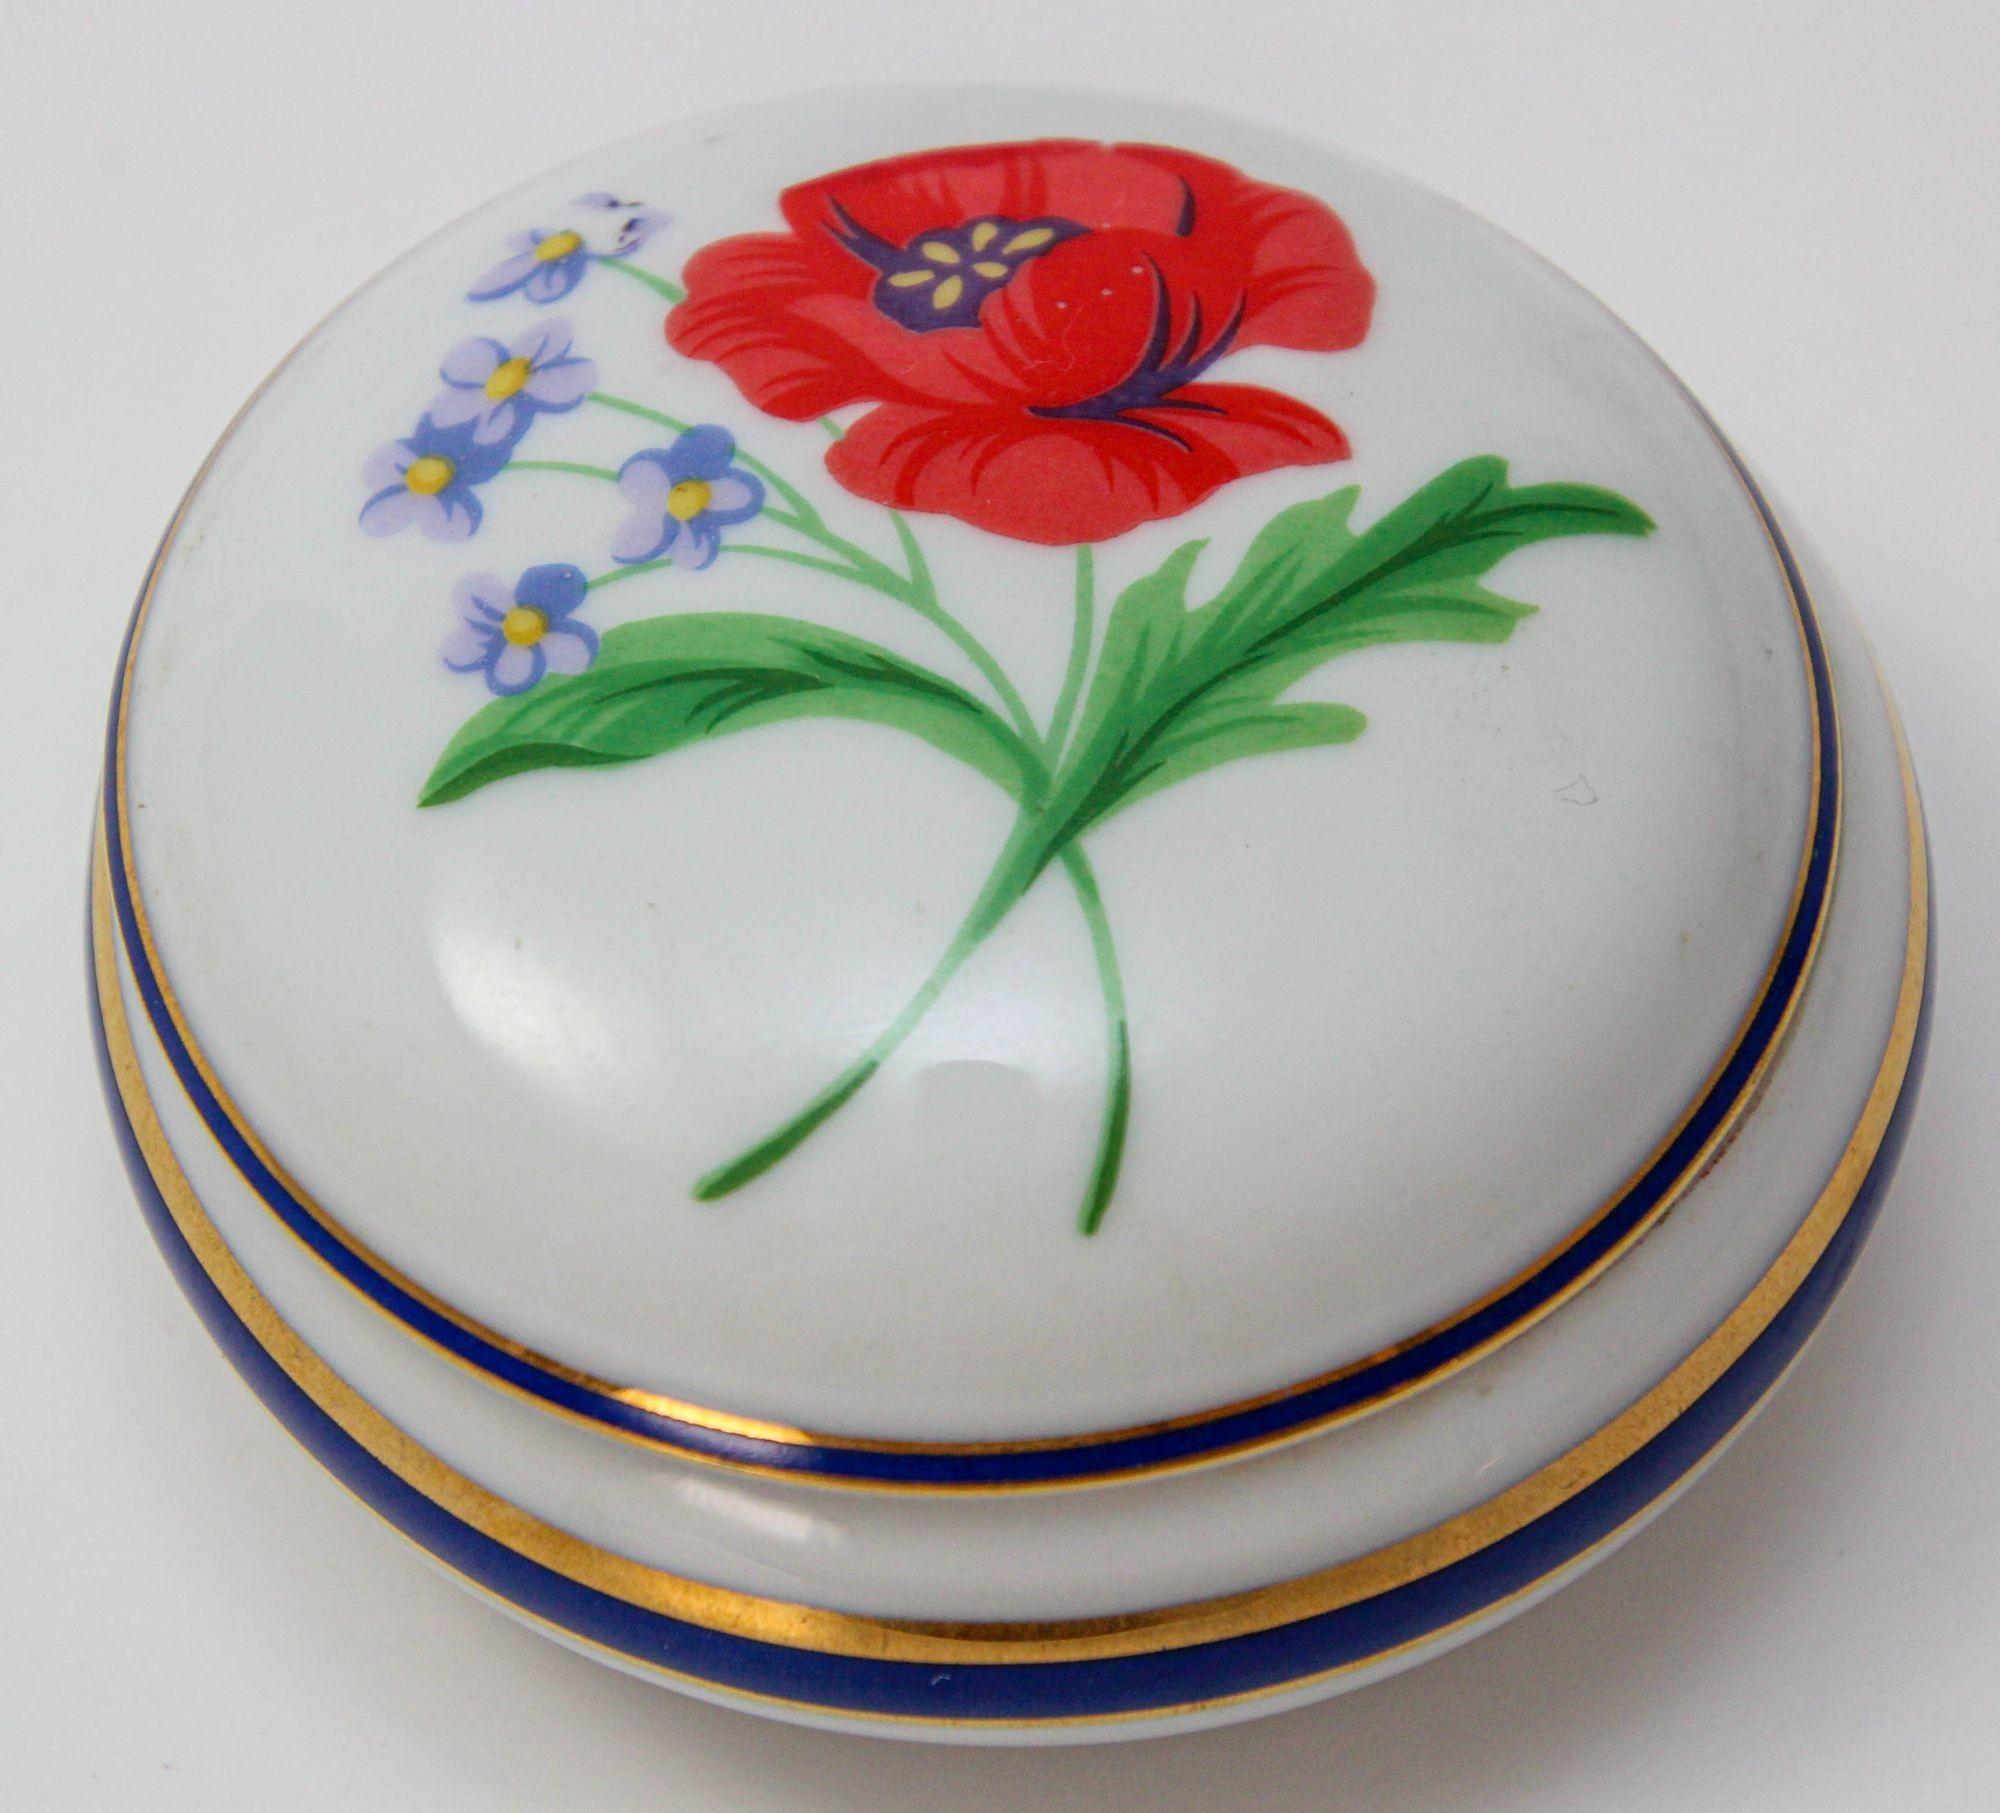 Tiffany & Co. Limoges France American Garden Round Porcelain Collectible Box 1